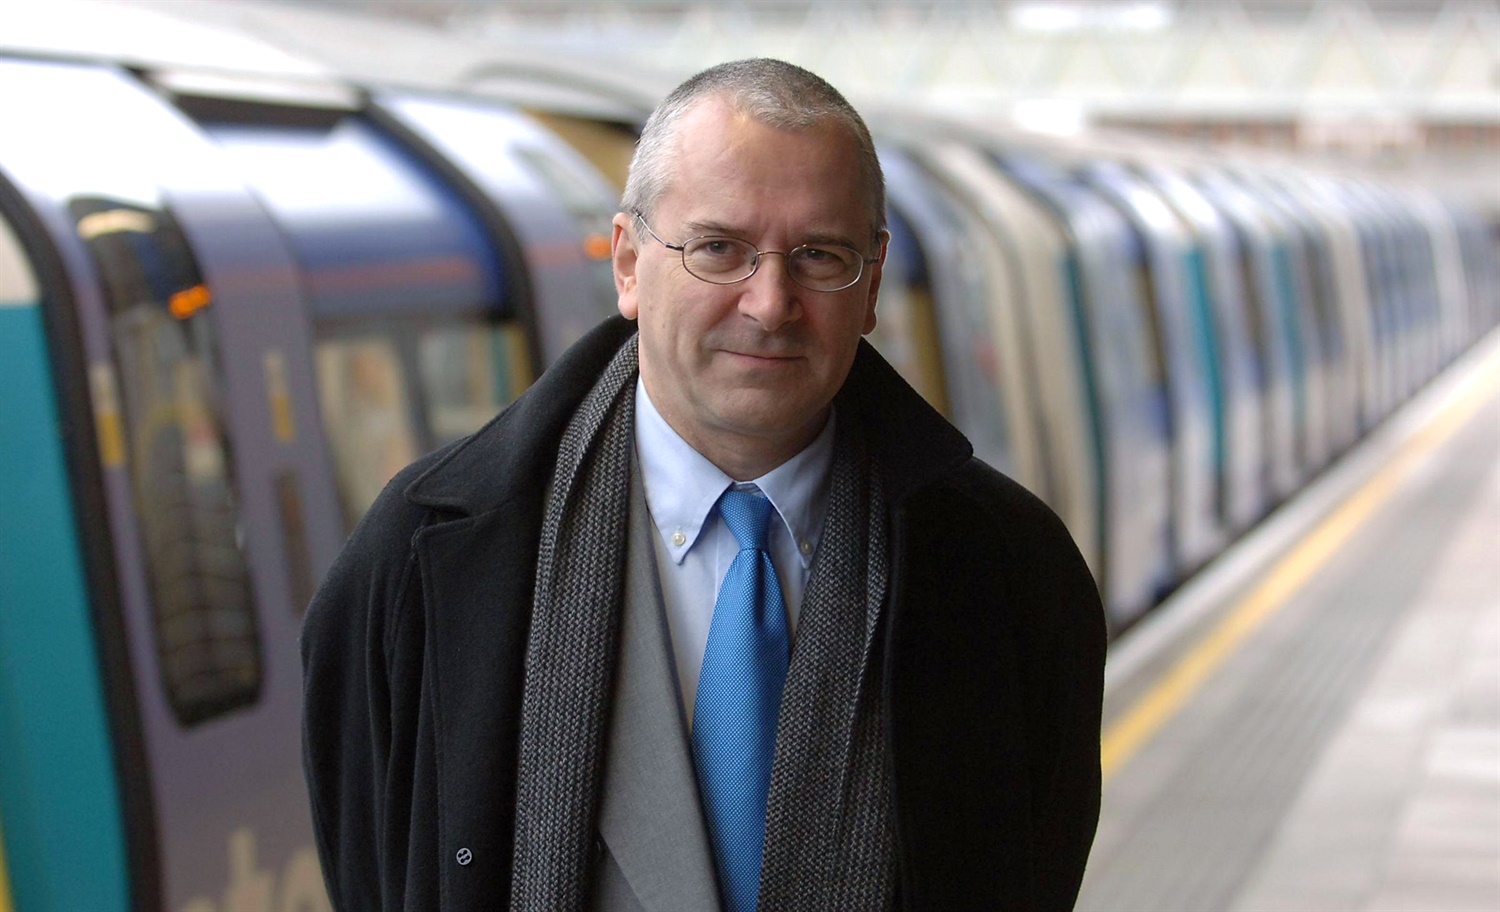 ‘London’s suburban rail services are awful’, says TfL’s top man